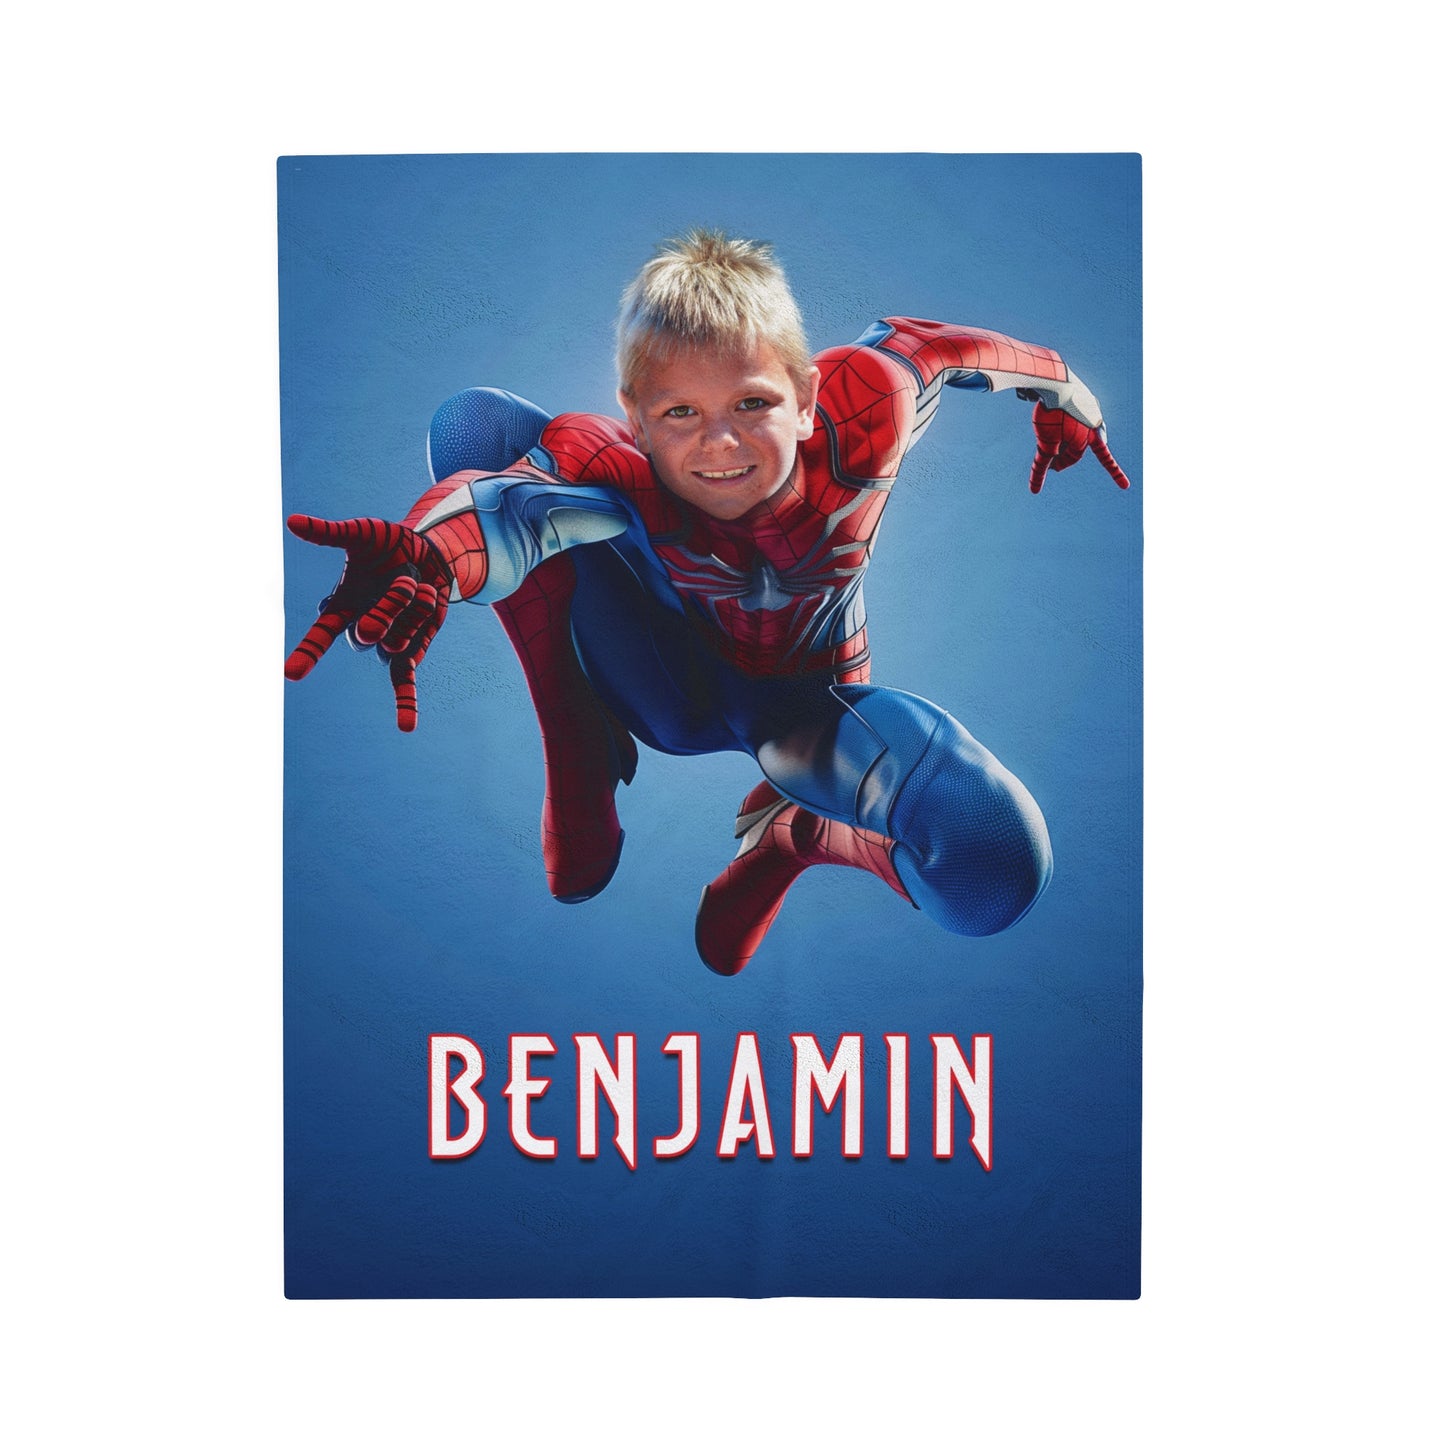 Example of spiderman blanket with child superimposed